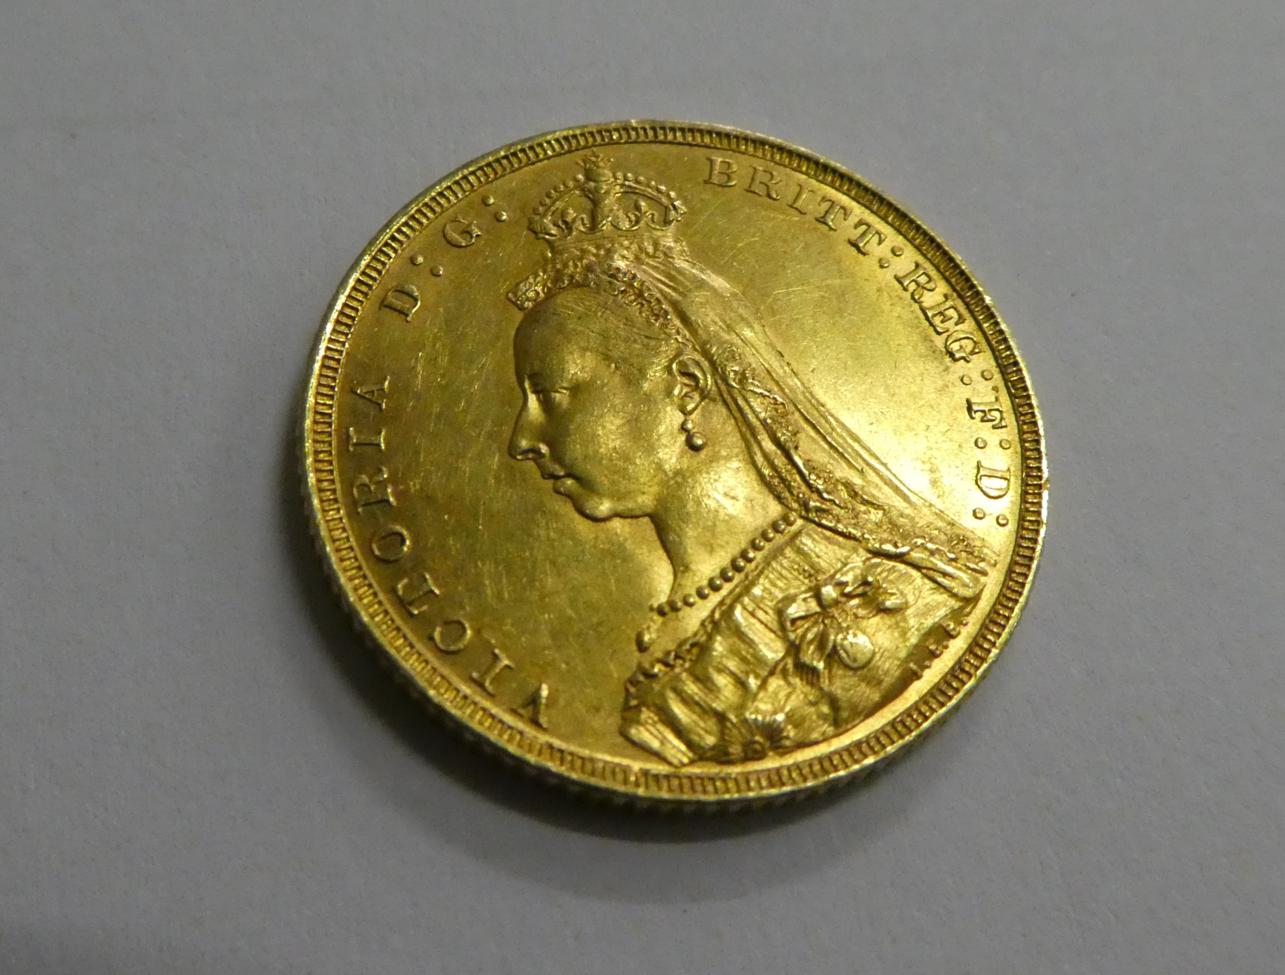 Queen Victoria 1888 gold sovereign - Image 2 of 2